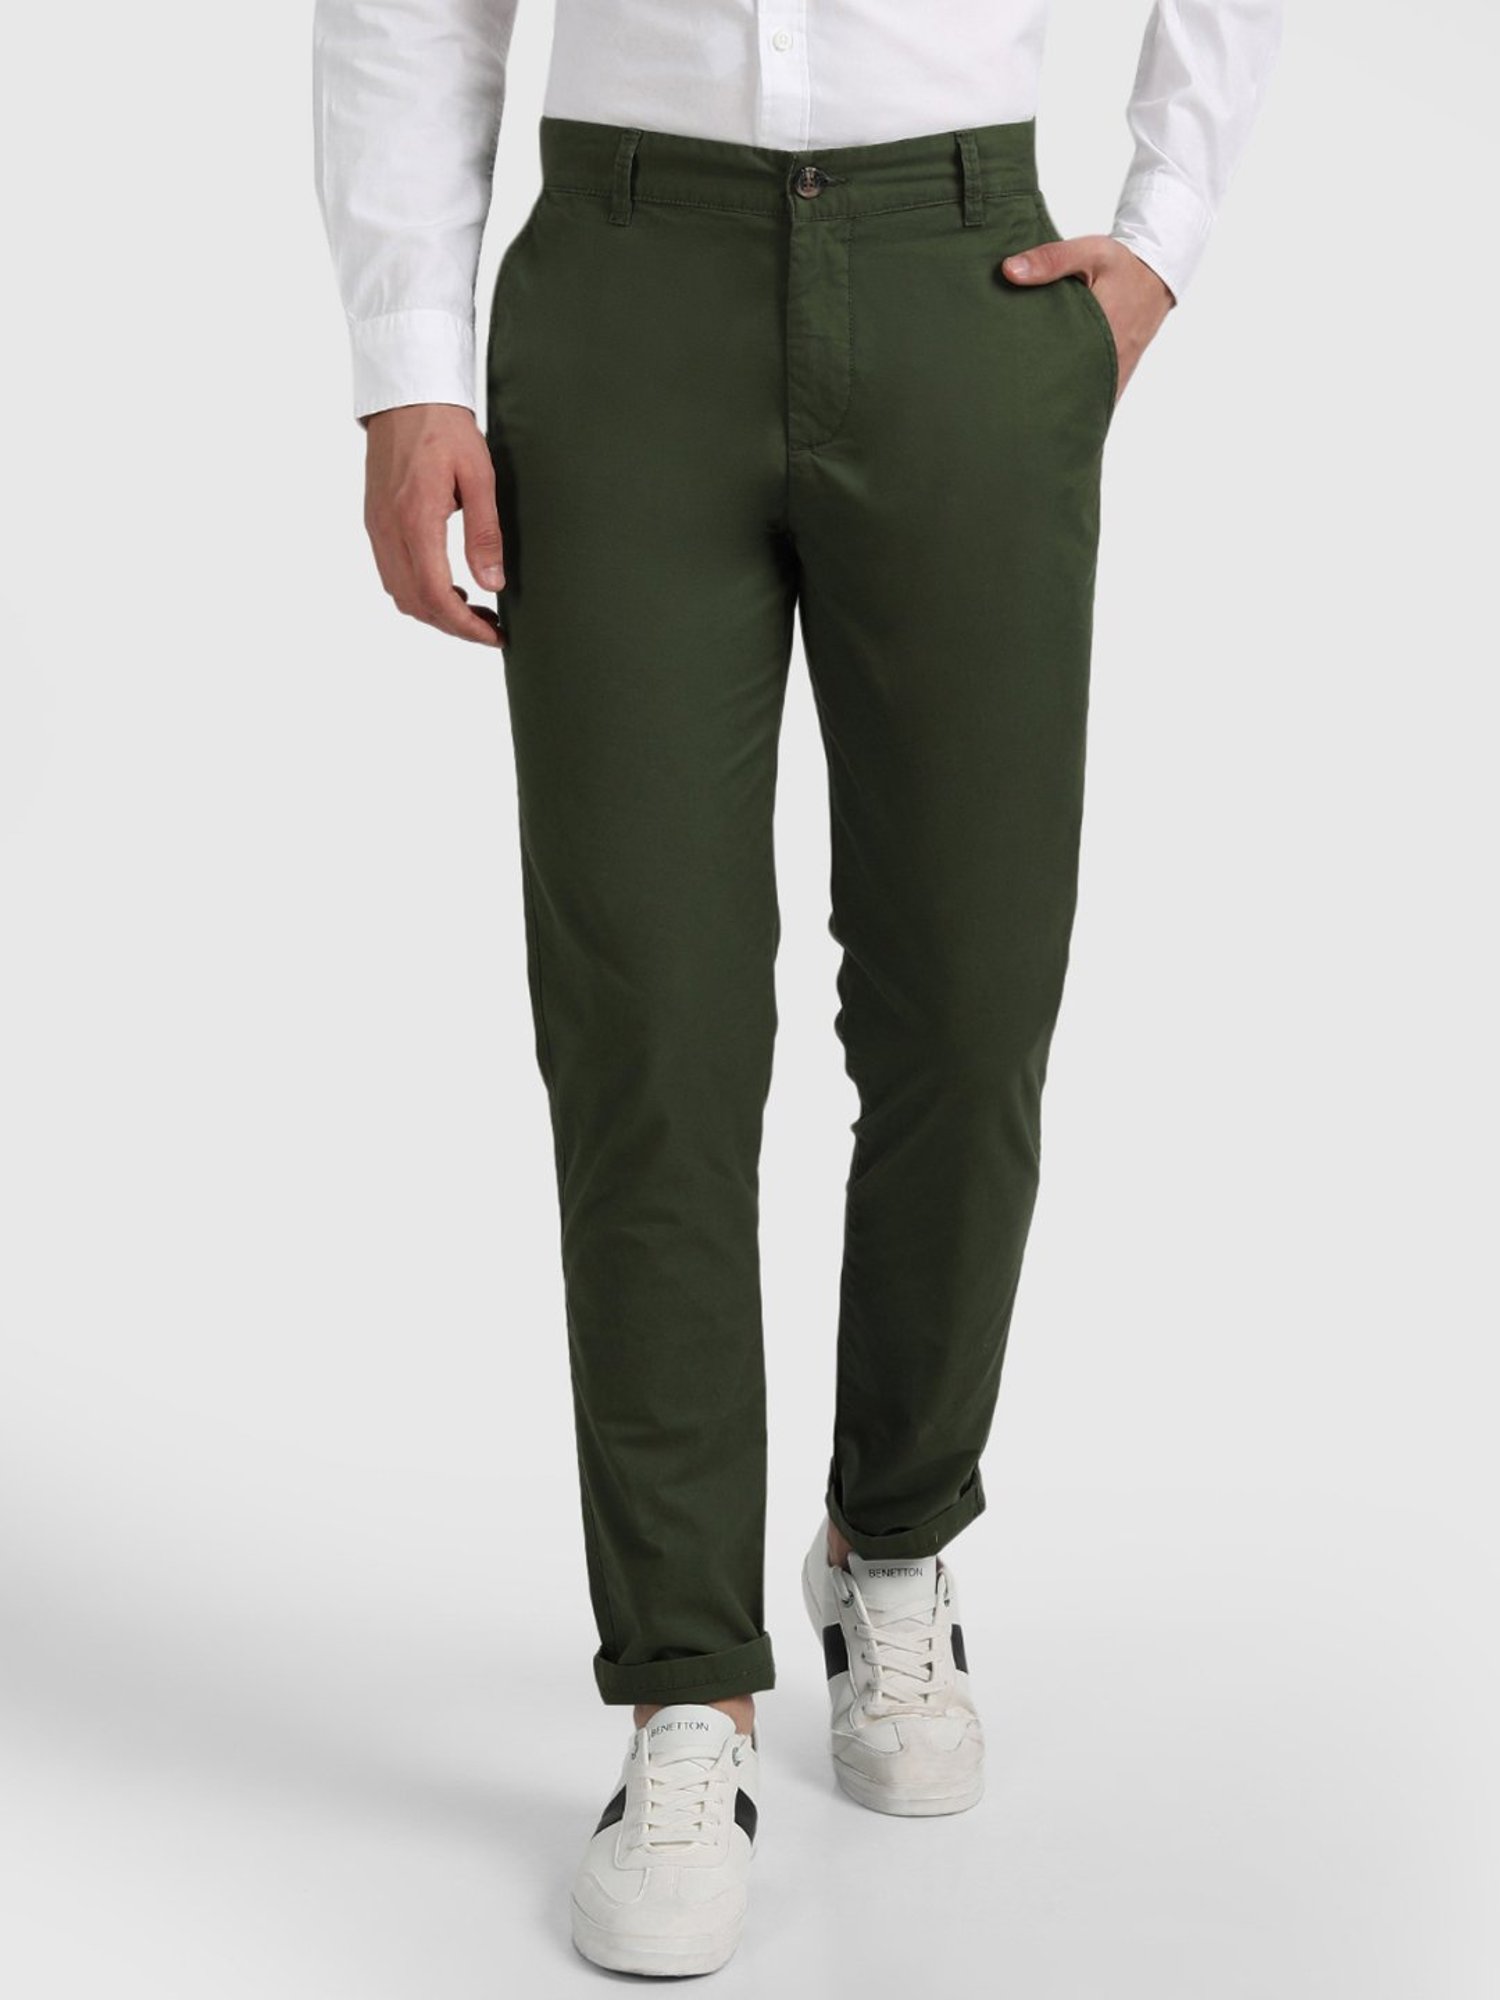 Buy United Colors of Benetton Green Cotton Slim Fit Chinos for Mens Online   Tata CLiQ